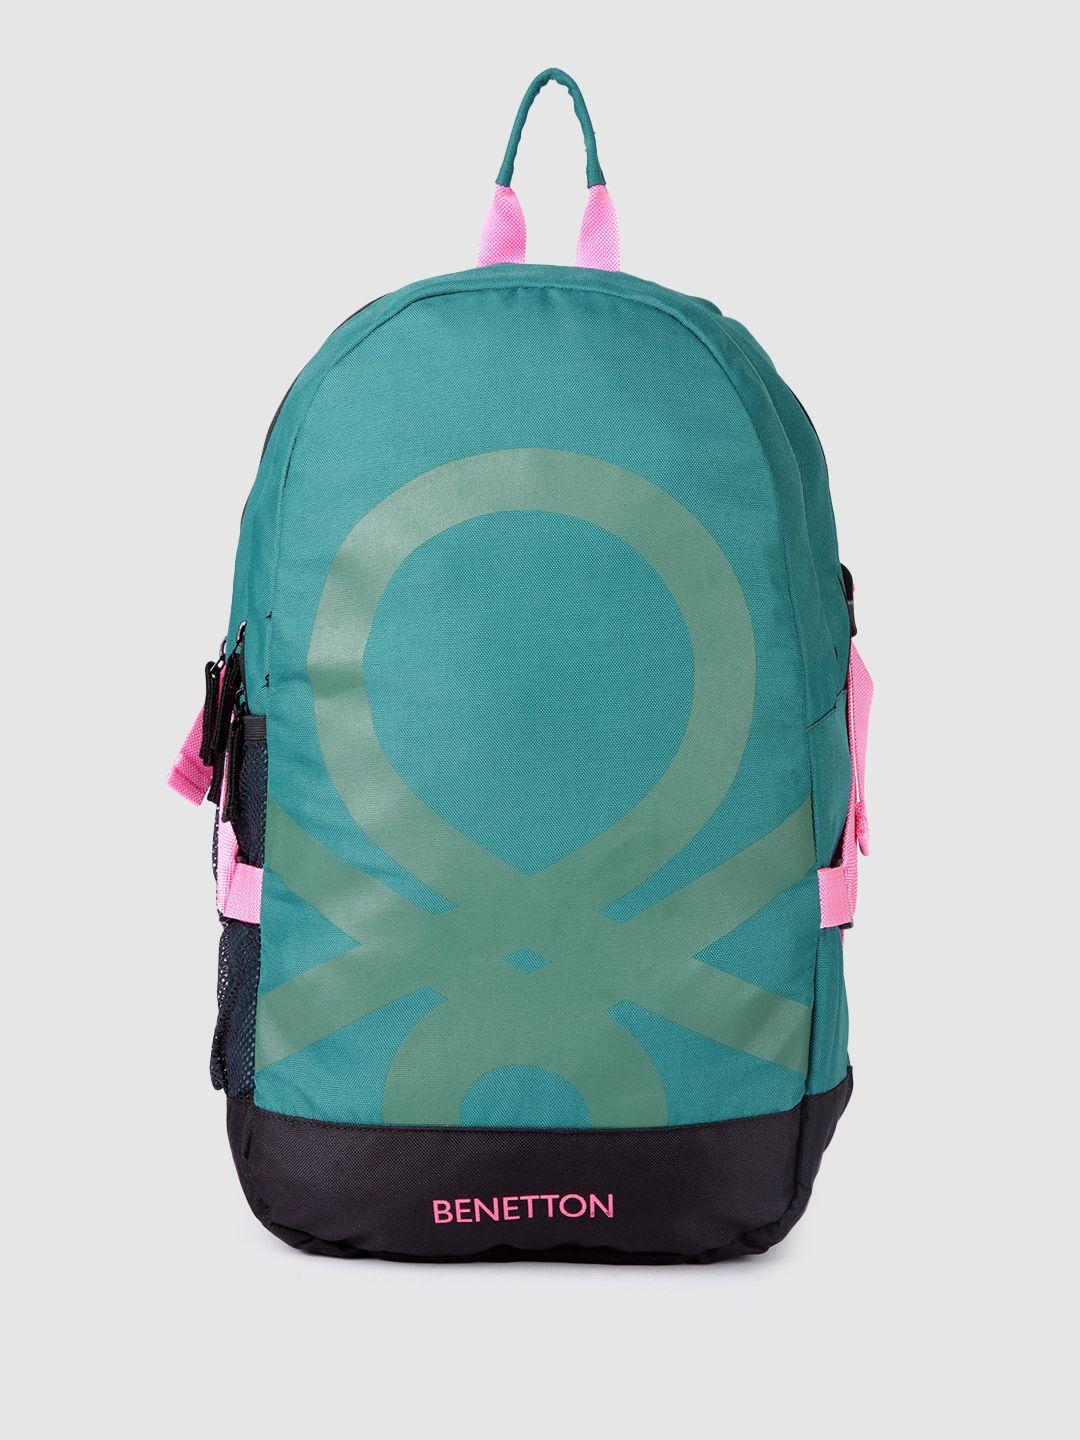 united colors of benetton unisex brand logo print laptop backpack with compression straps